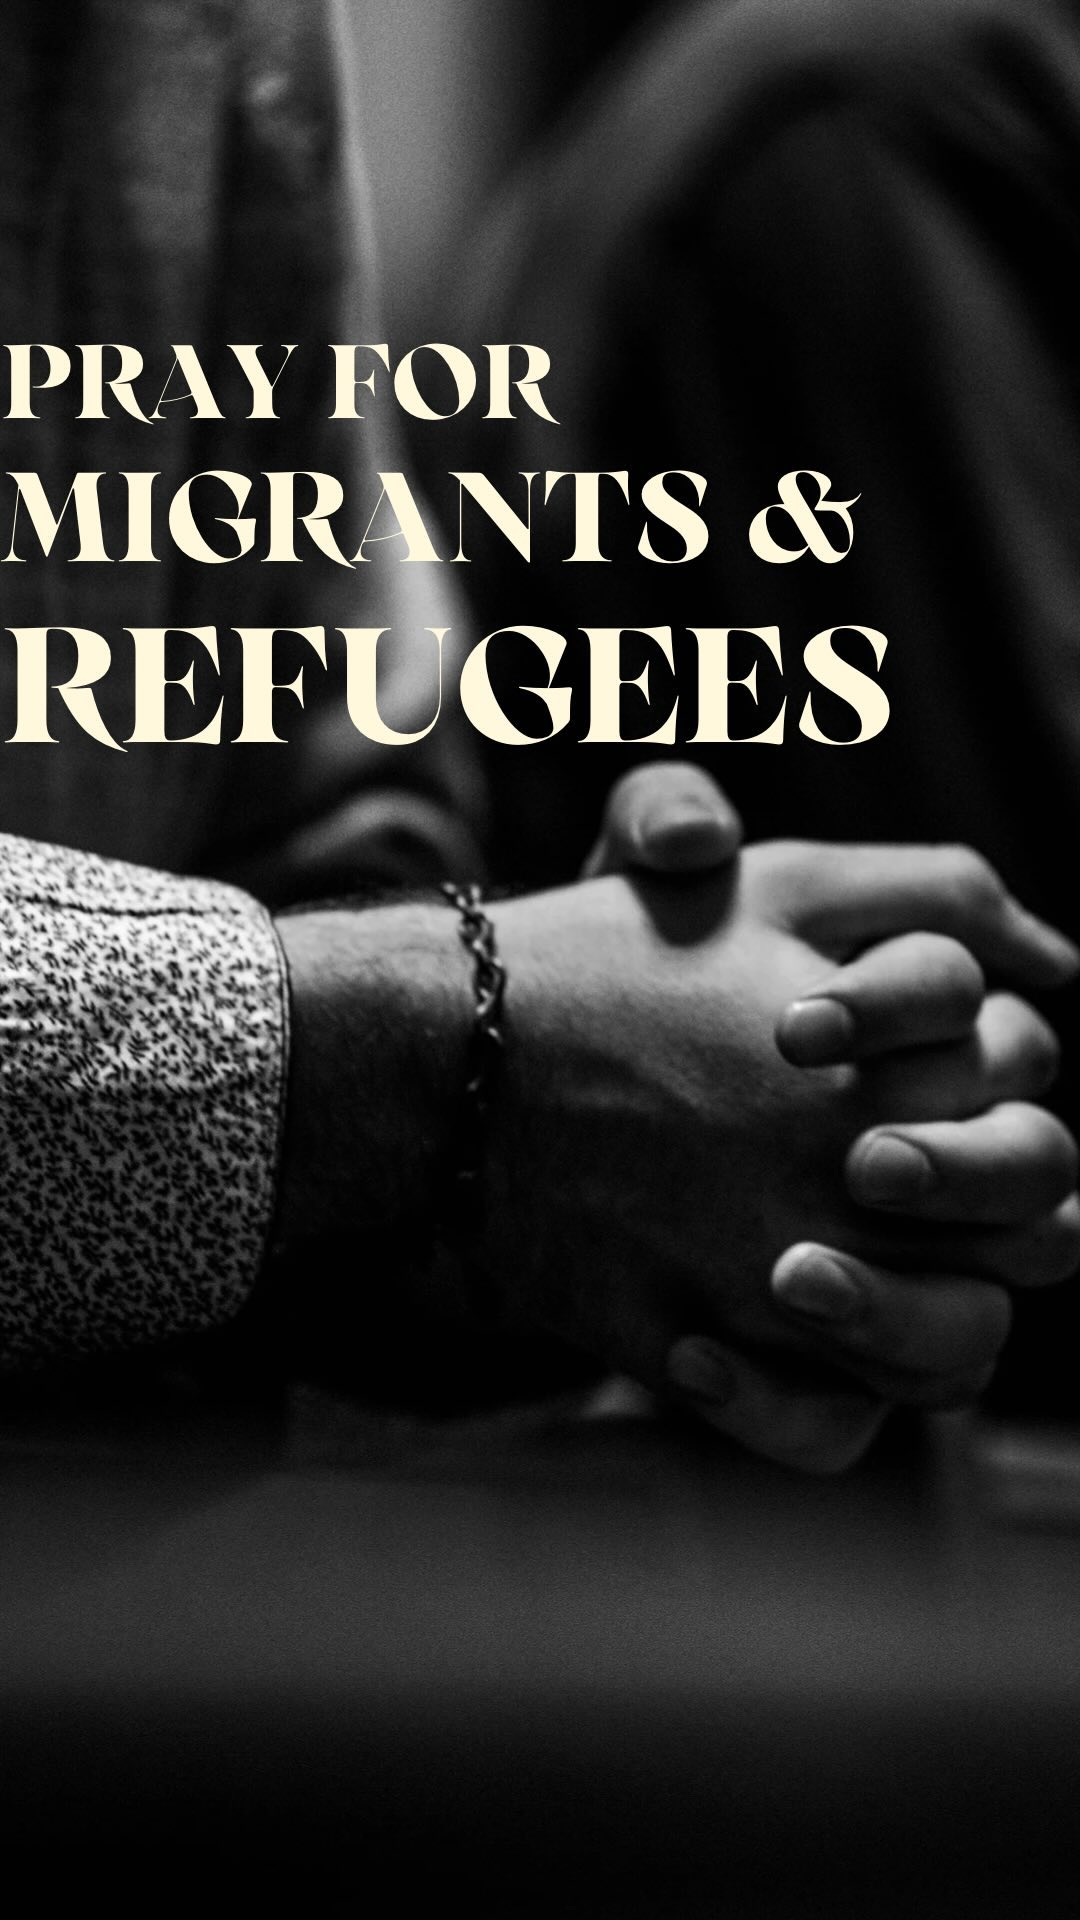 As National Migration Week ends, join us in praying for all migrants & refugees. 

🙏 Merciful God, we pray for families and invidious who have left or fled their homes, seeking safer and better lives. 
We lift to you their hopes, fears, and needs, that they may be protected on their journeys, their dignity and rights may be honored and upheld, and they may be welcomed with open arms into generous and compassionate communities. 
Amen. 

St. Francis Xavier Cabrini, patron of immigrants, pray for us!

Prayer from: @ccharitiesusa